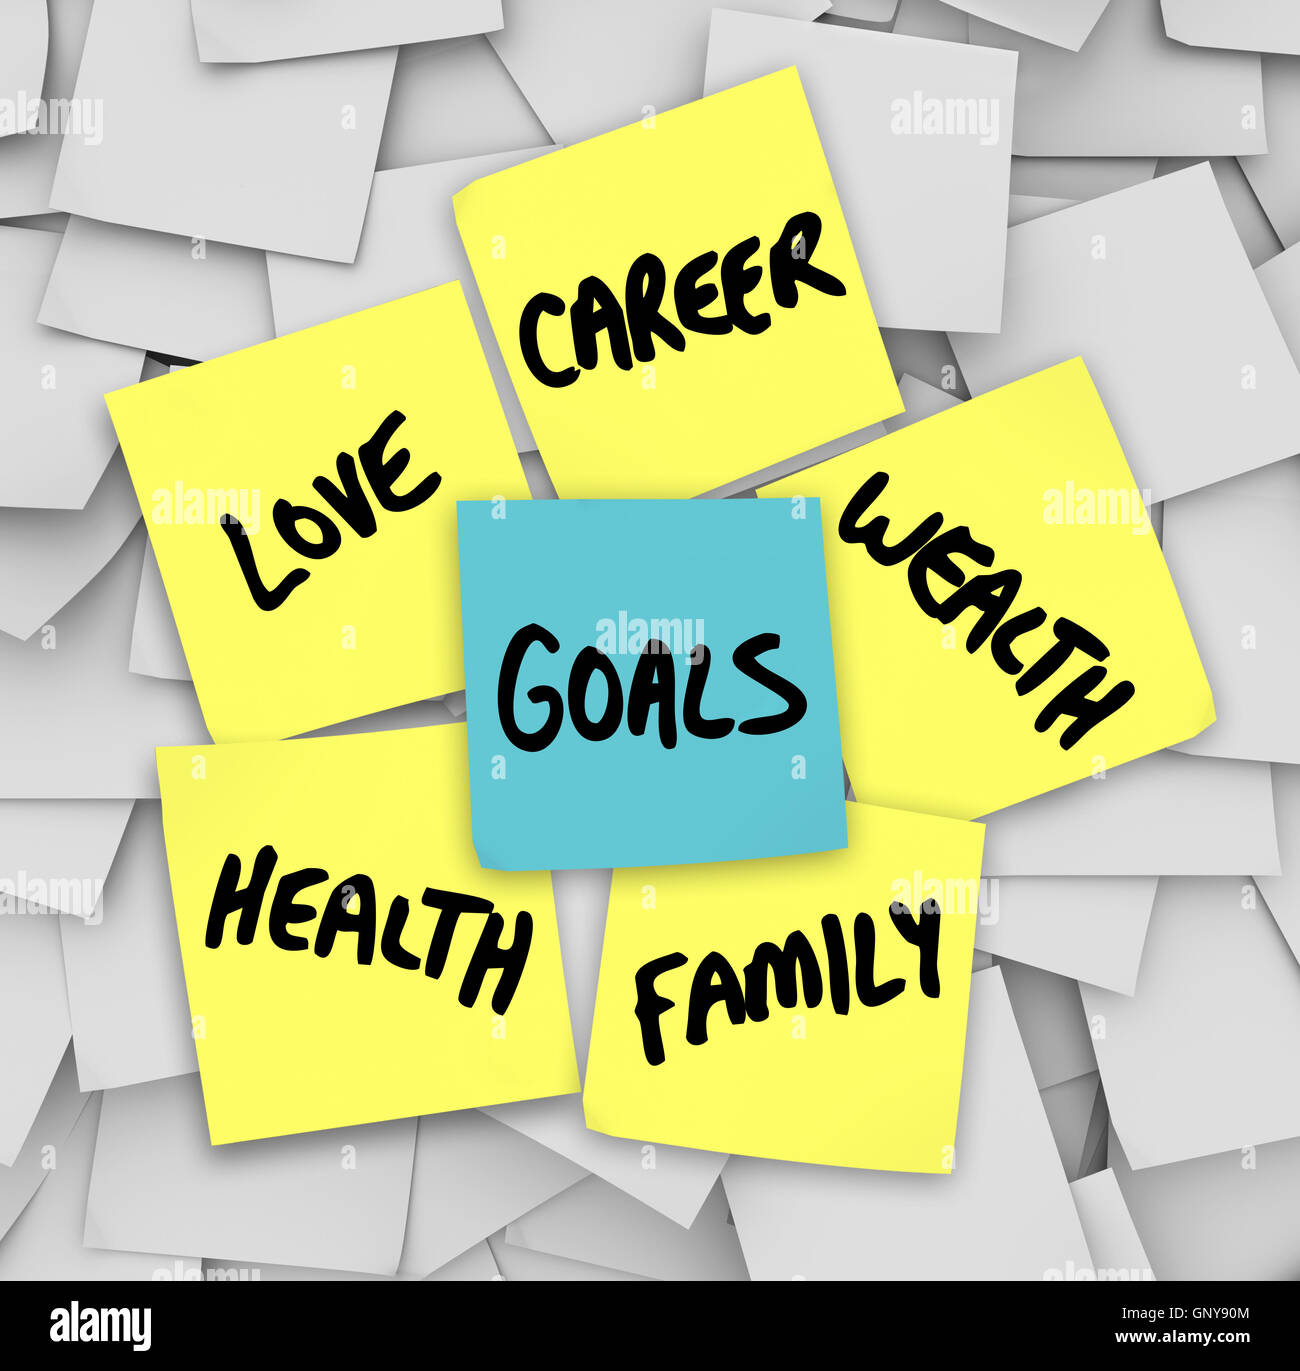 Goals on Sticky Notes Health Wealth Career Love Stock Photo